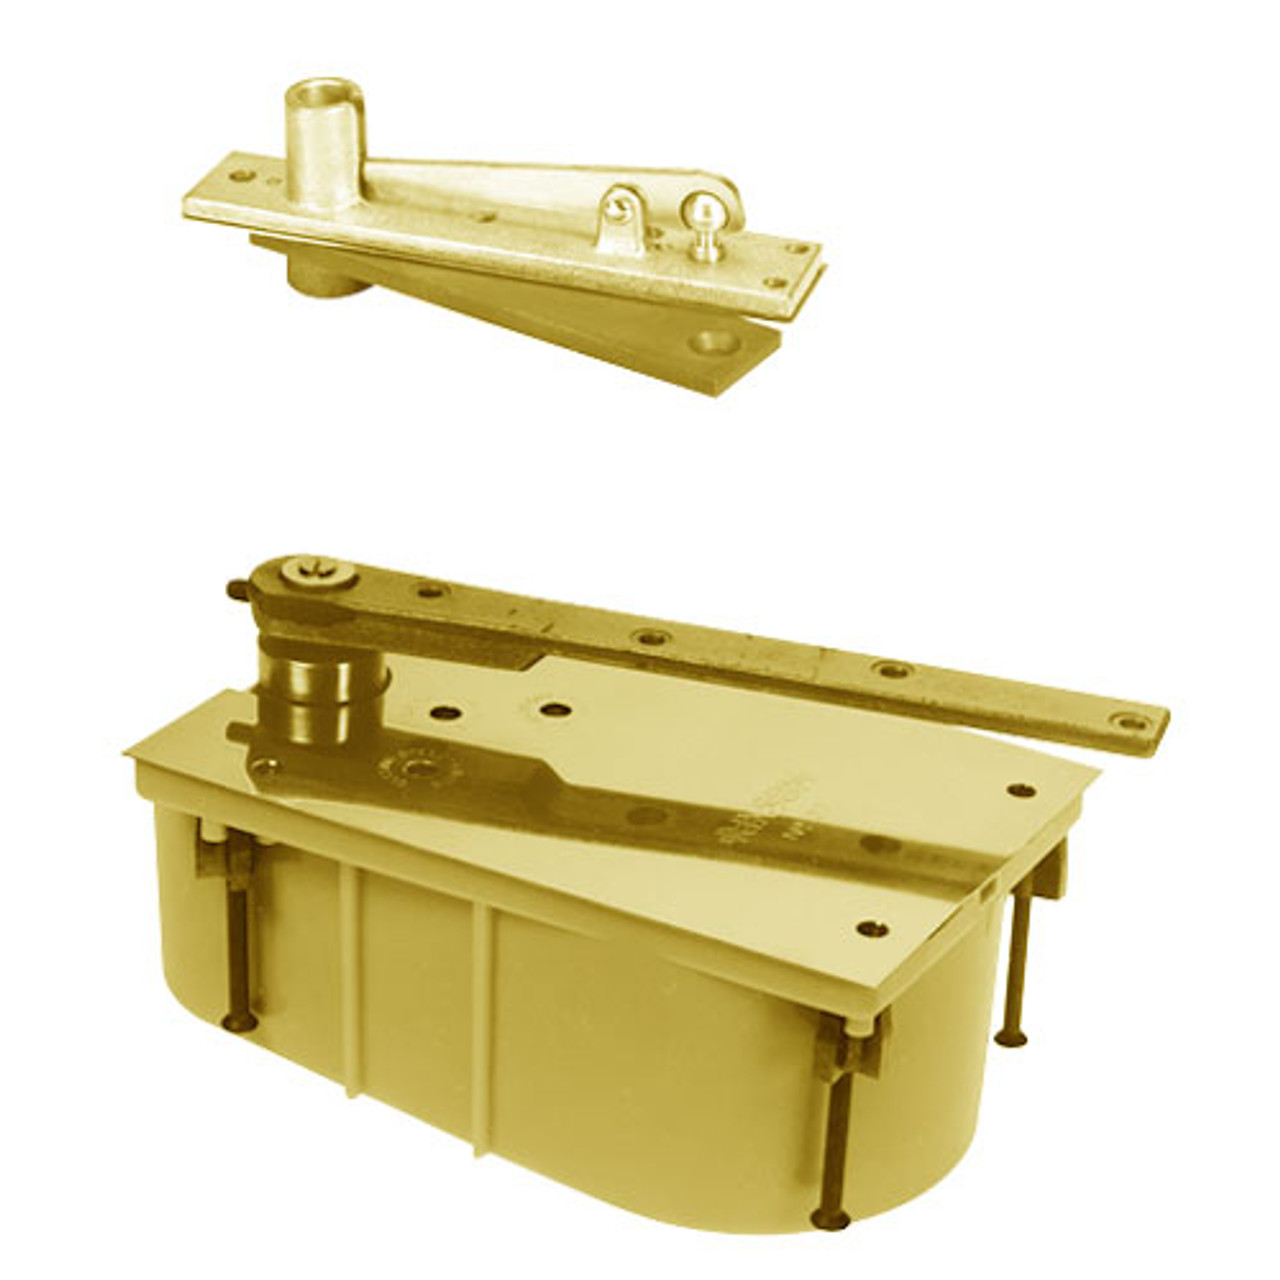 28-105N-554-LH-605 Rixson 28 Series Heavy Duty Single Acting Center Hung Floor Closer with Concealed Arm in Bright Brass Finish